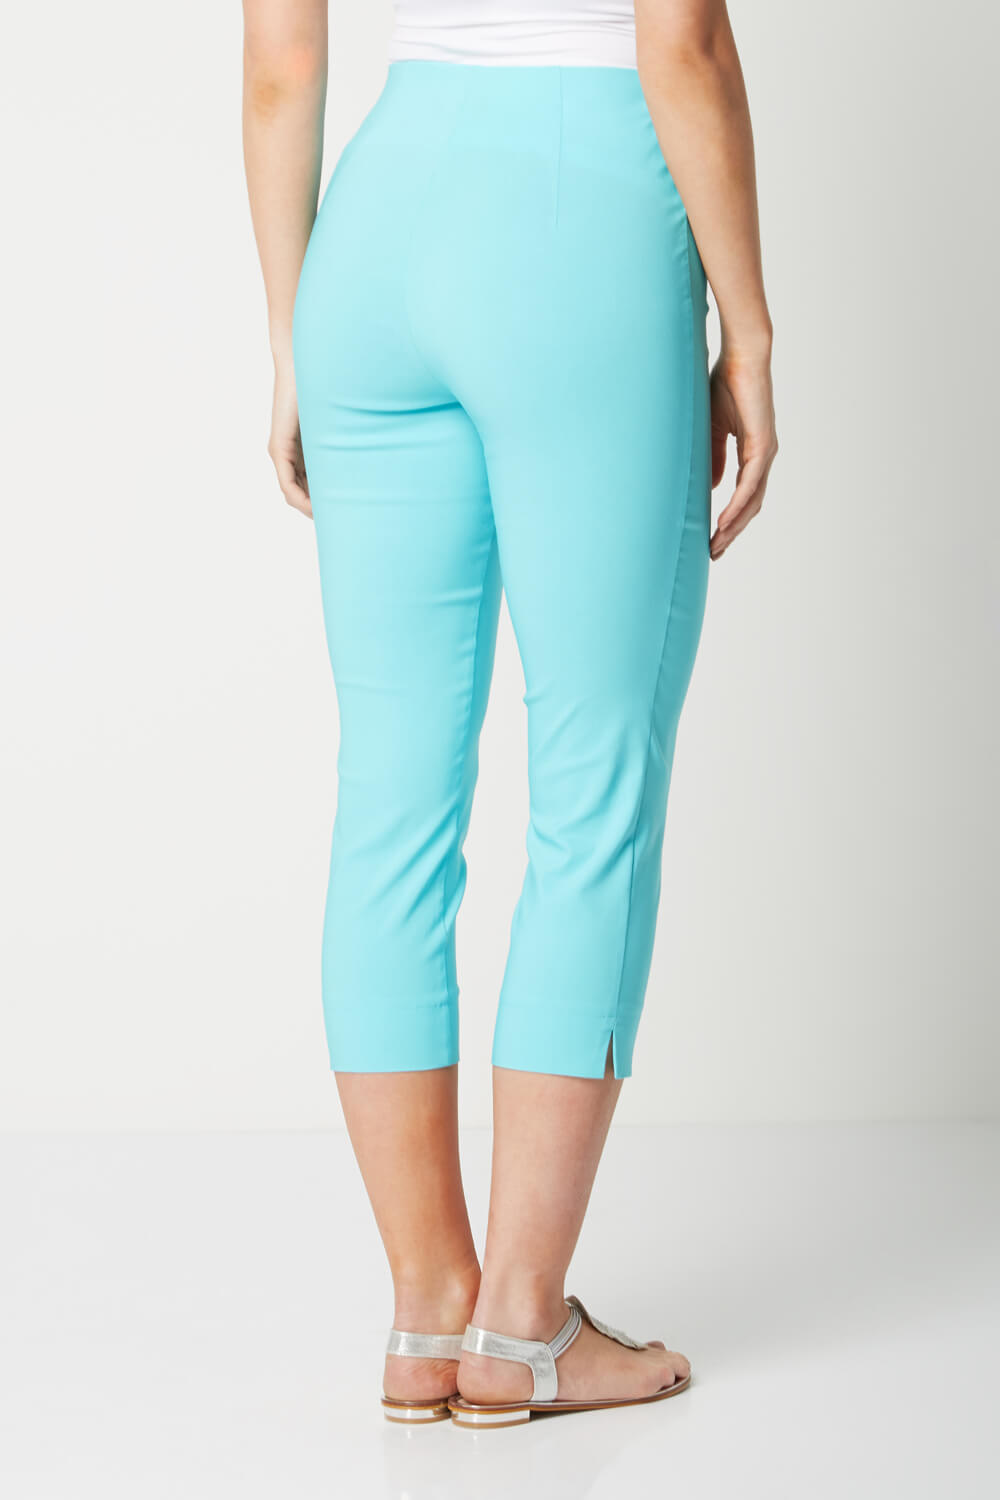 Turquoise Cropped Stretch Trouser, Image 2 of 3